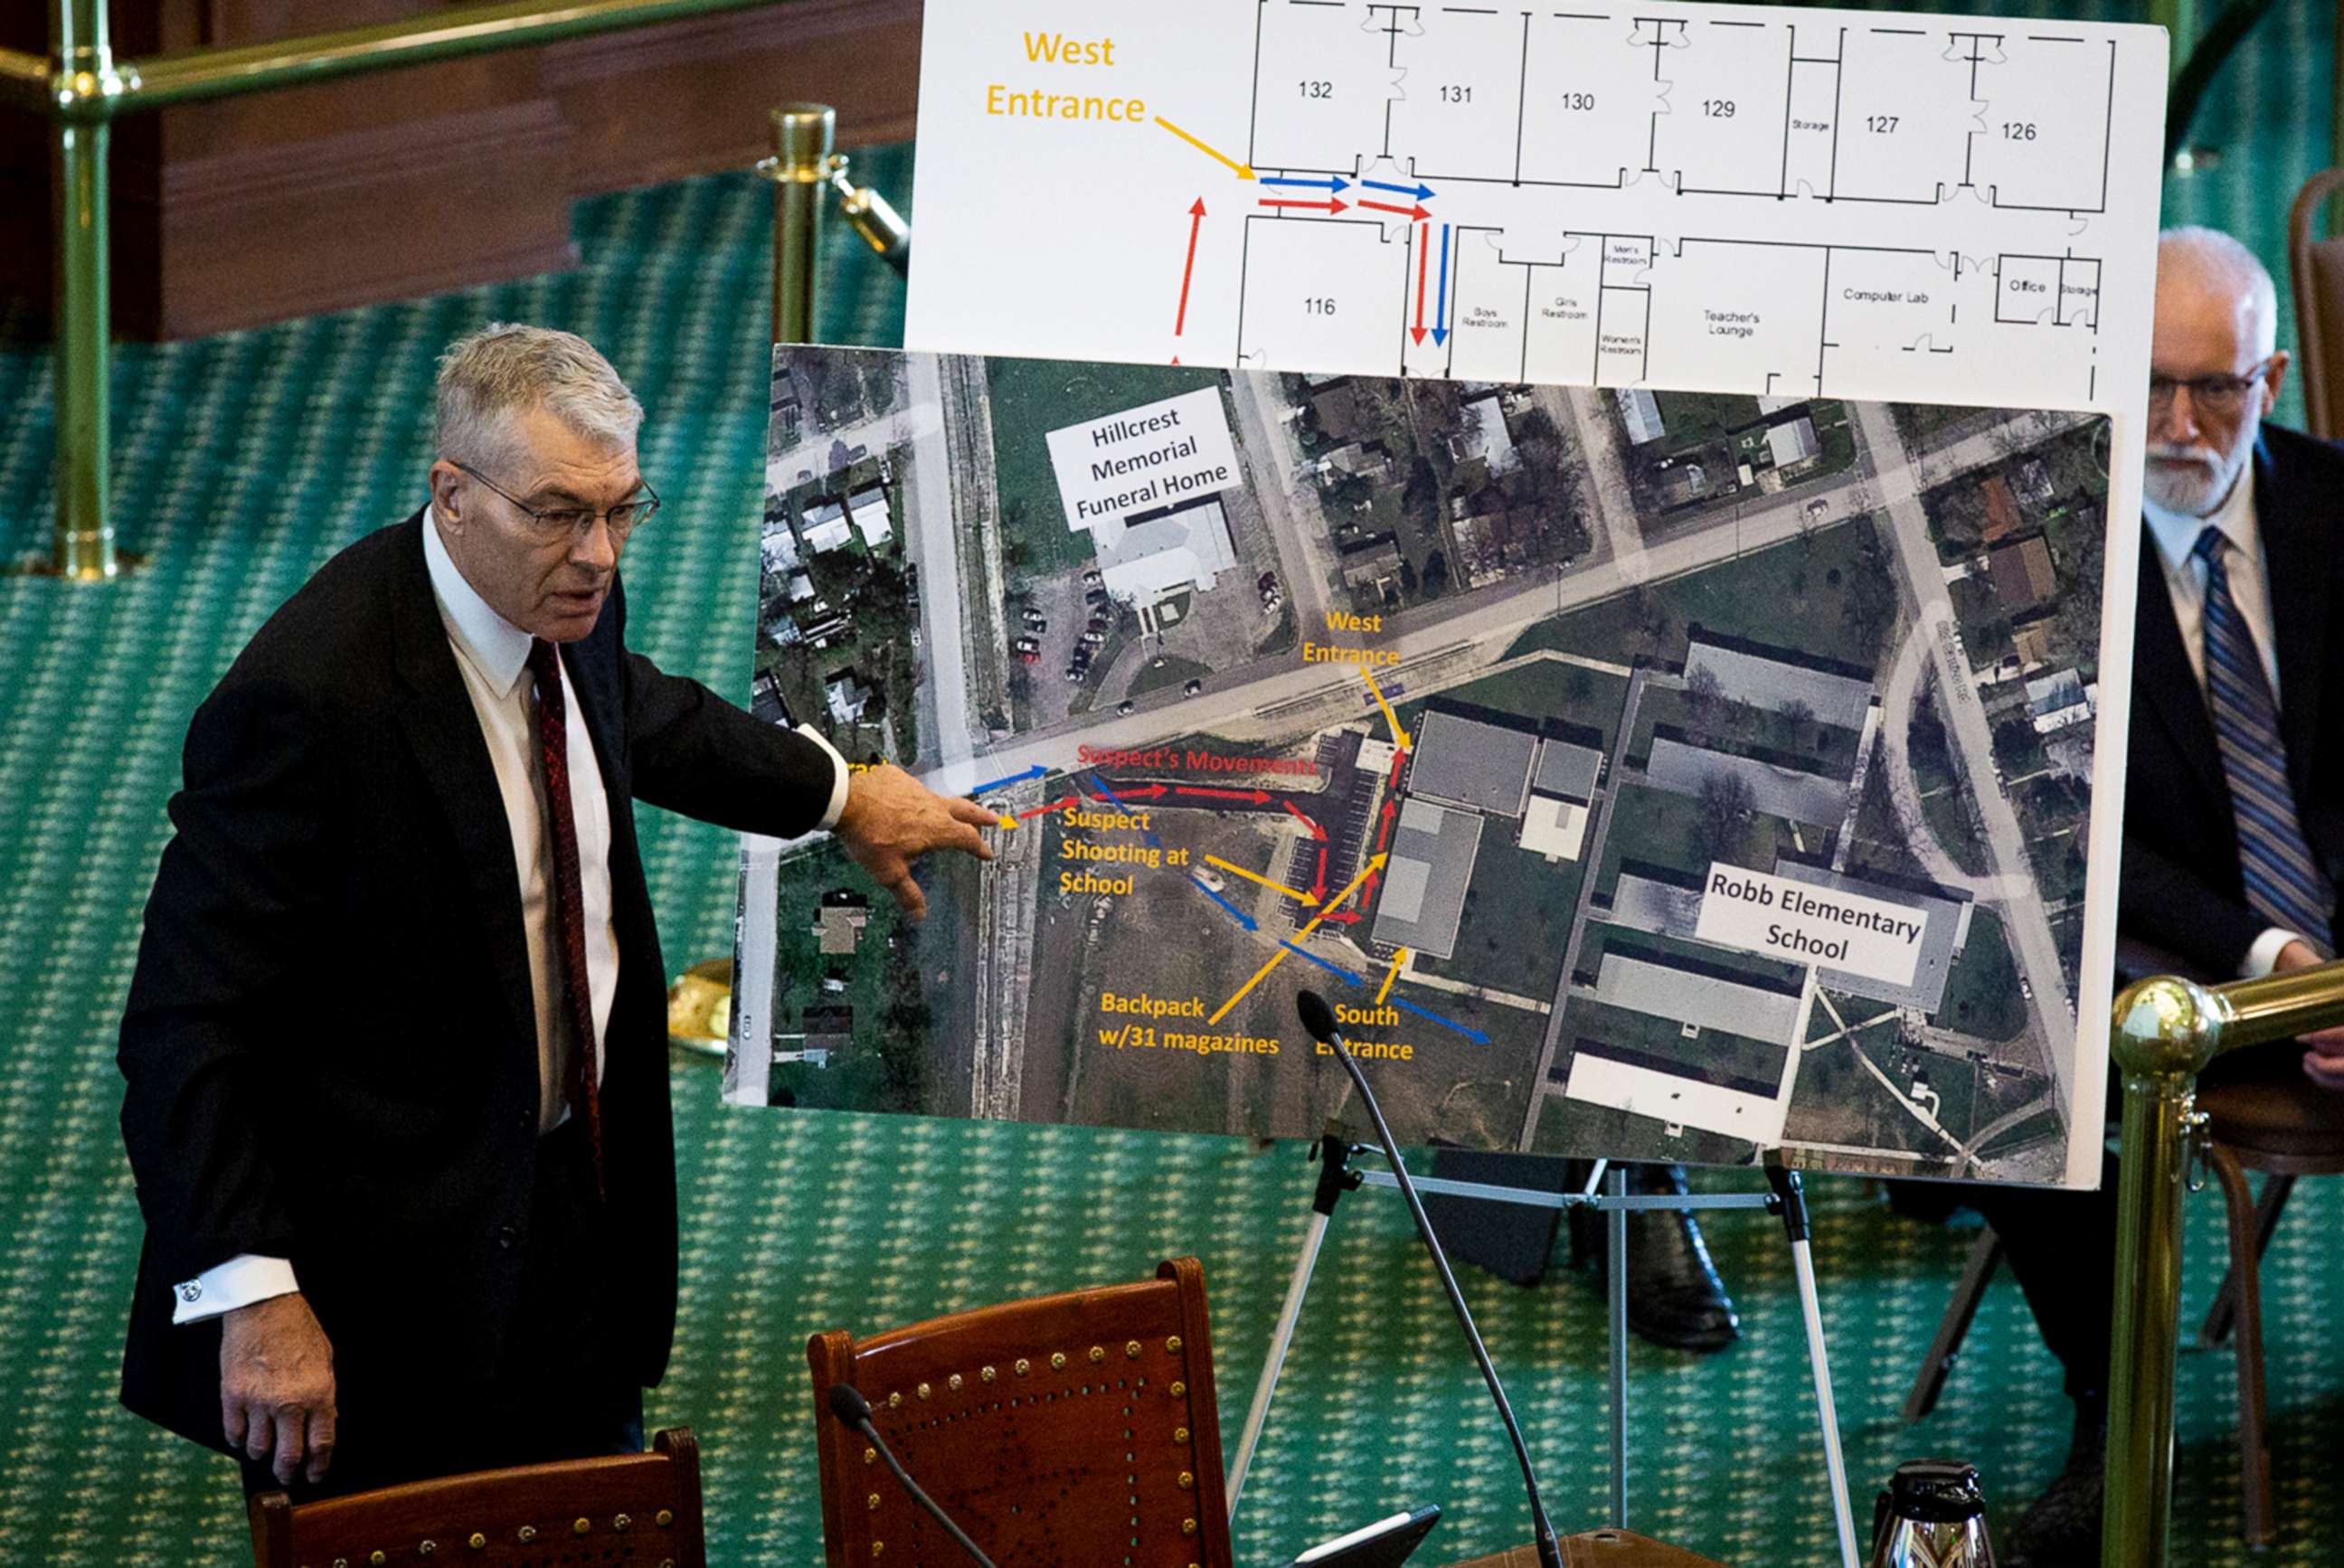 PHOTO: Department of Public Safety Director Steve McCraw uses maps and graphics to present a timeline of the school shooting at Robb Elementary School in Uvalde, during the hearing at the State Capitol in Austin, June 21, 2022.